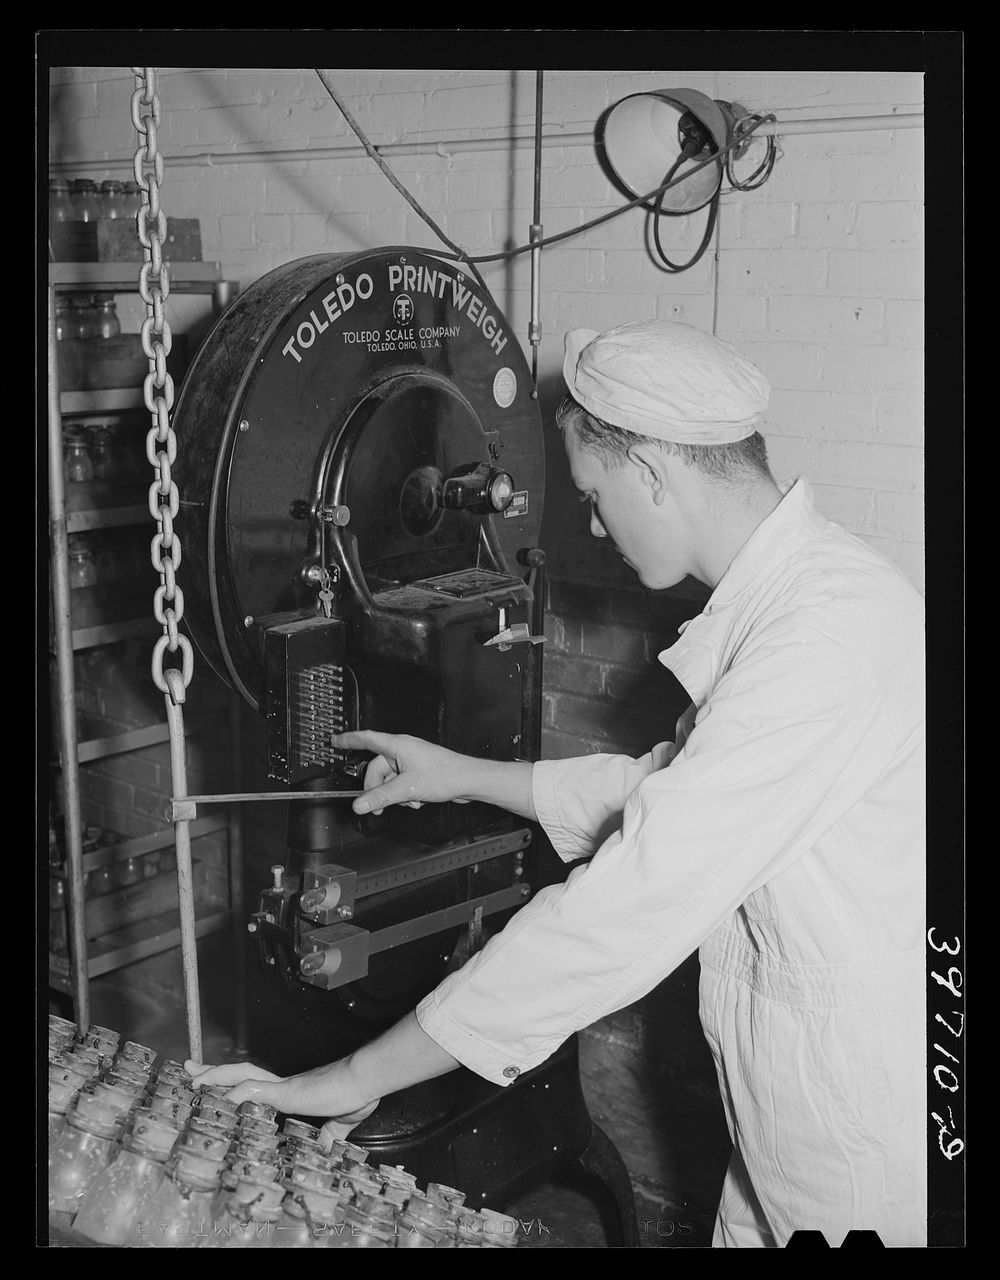 Recording weight, etc. of samples of cream and milk at Dairymen's Cooperative Creamery. Caldwell, Canyon County, Idaho by…